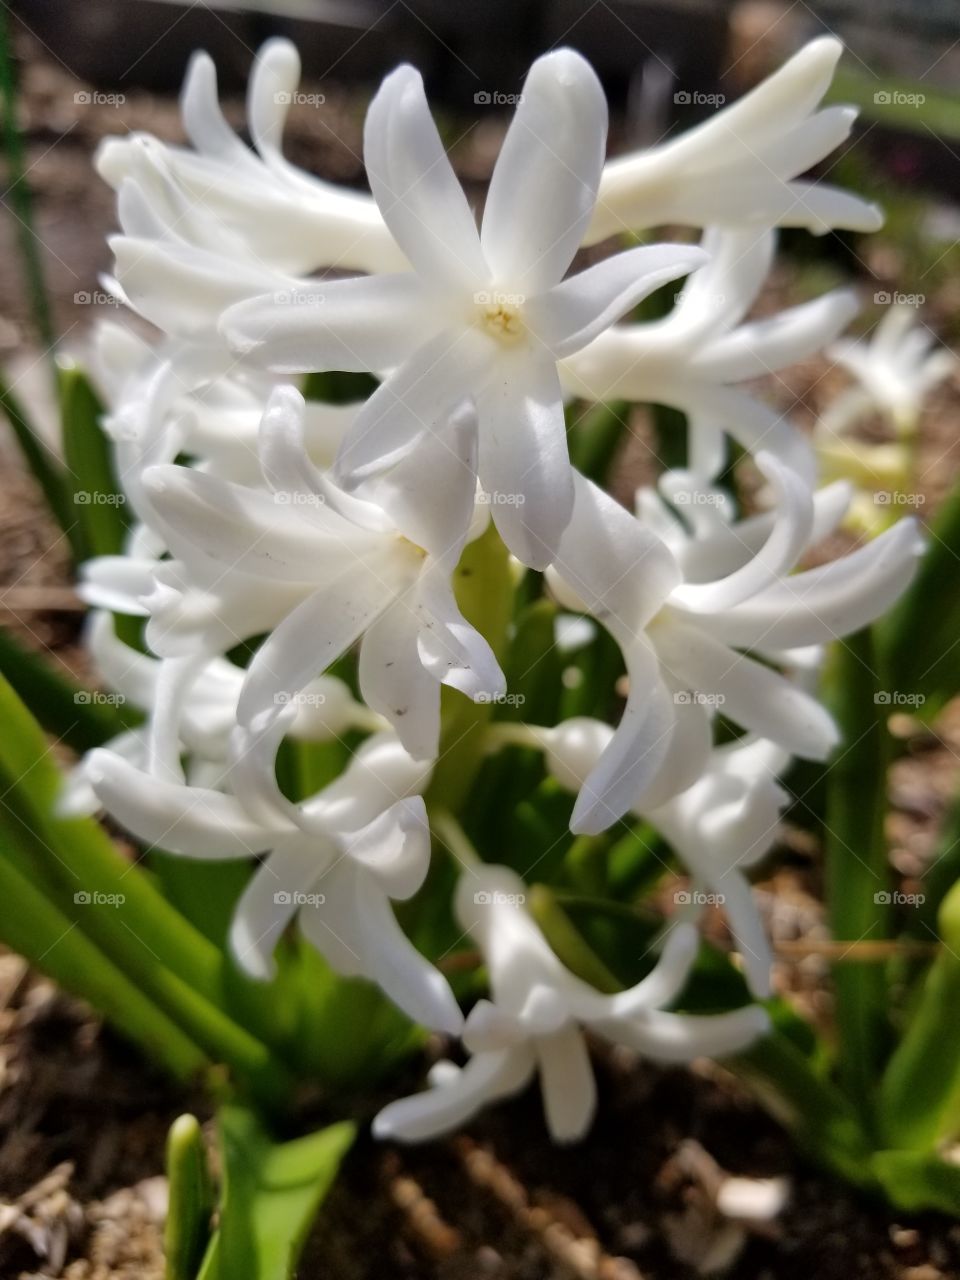 white hyacinths finally blooming! smells amazing